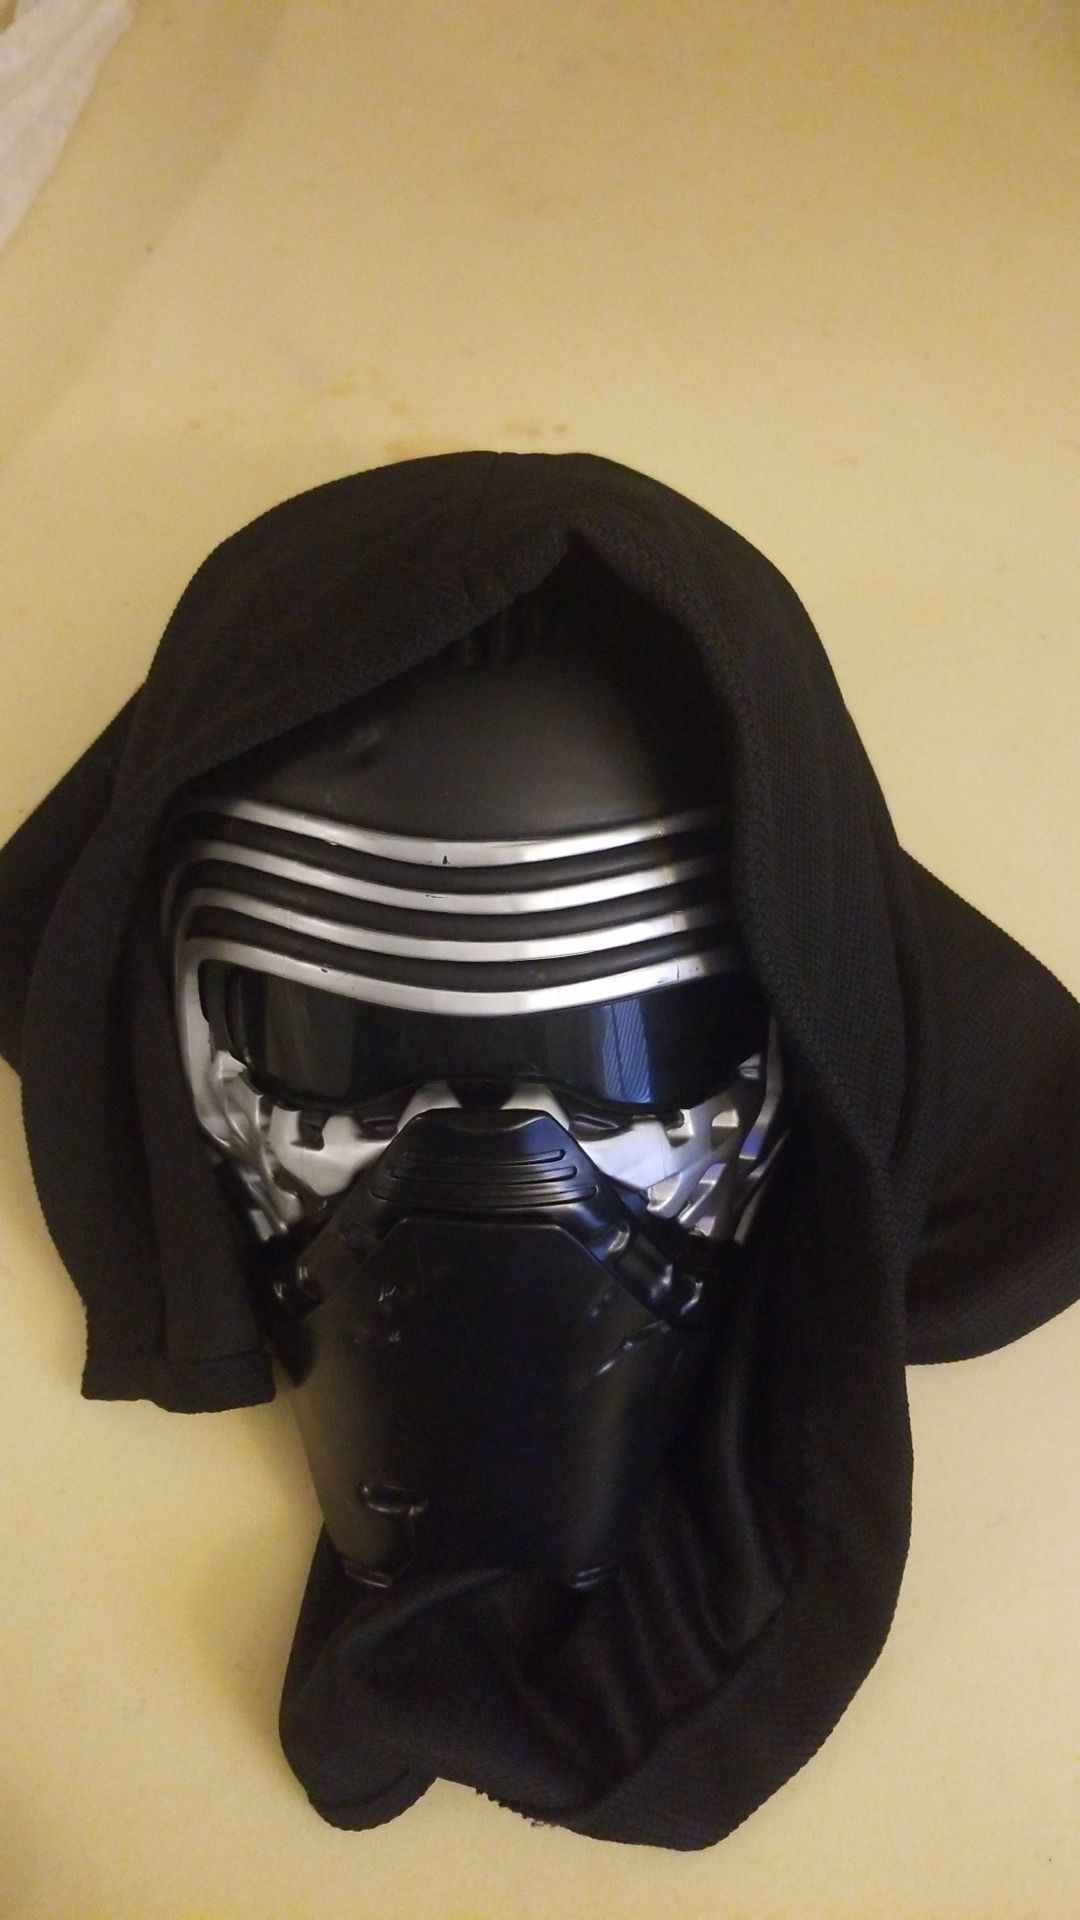 Official Disney store Kylo Ren voice changer mask with hood